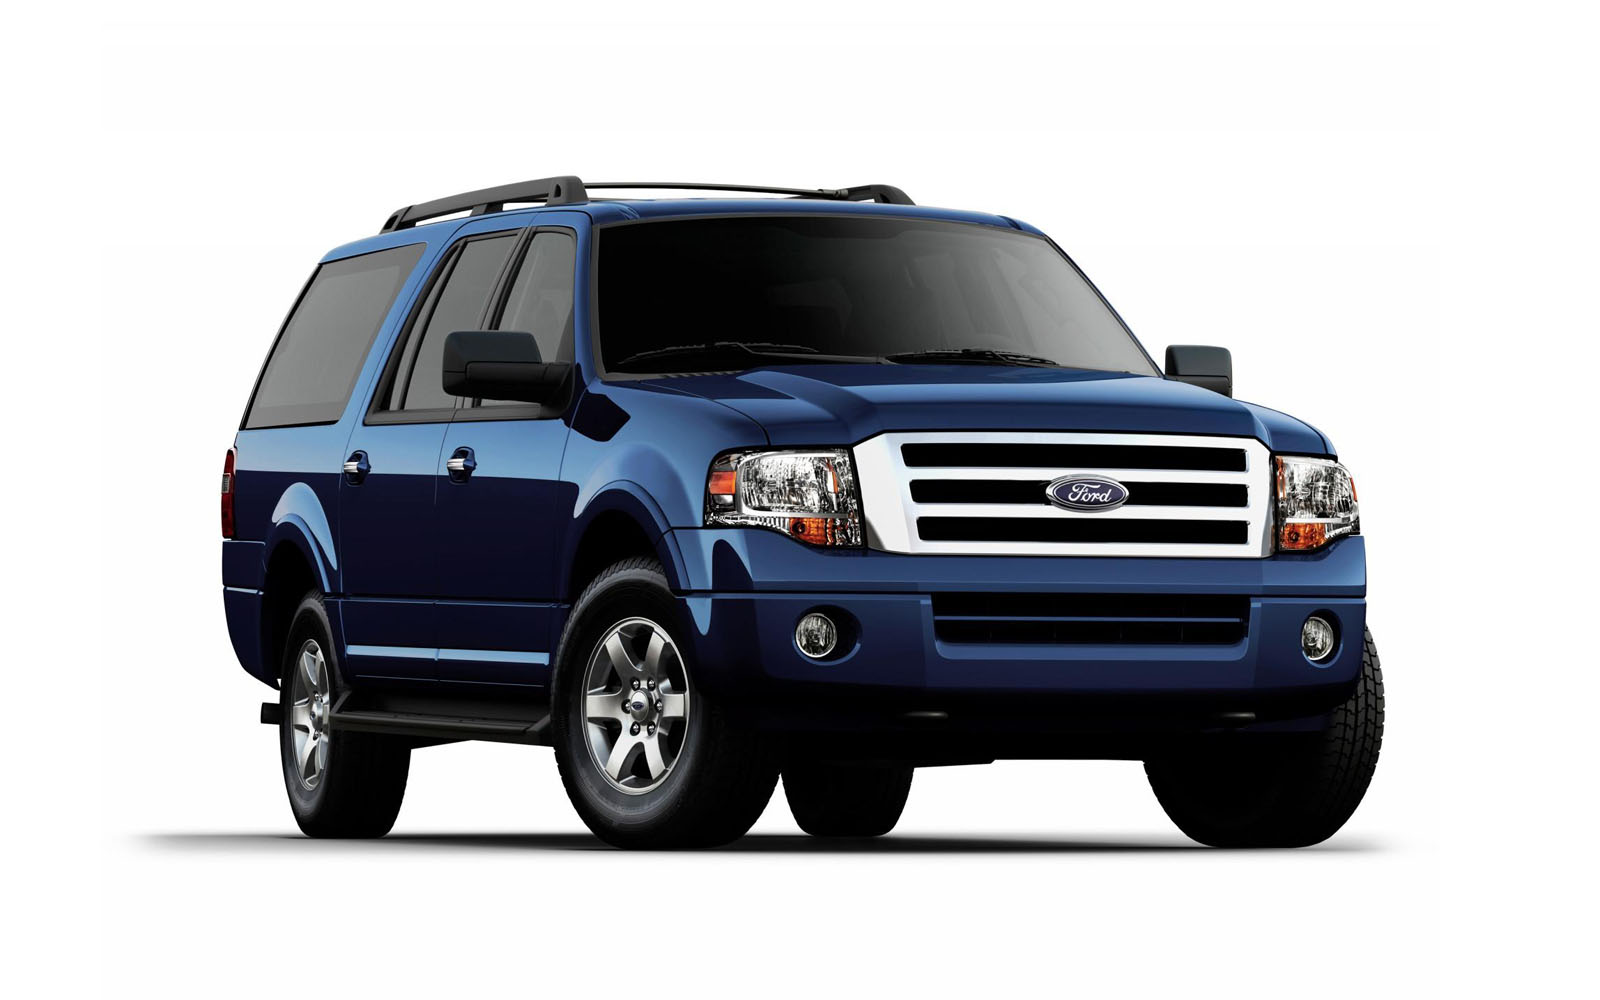 Wallpaper Ford Expedition Suv Car